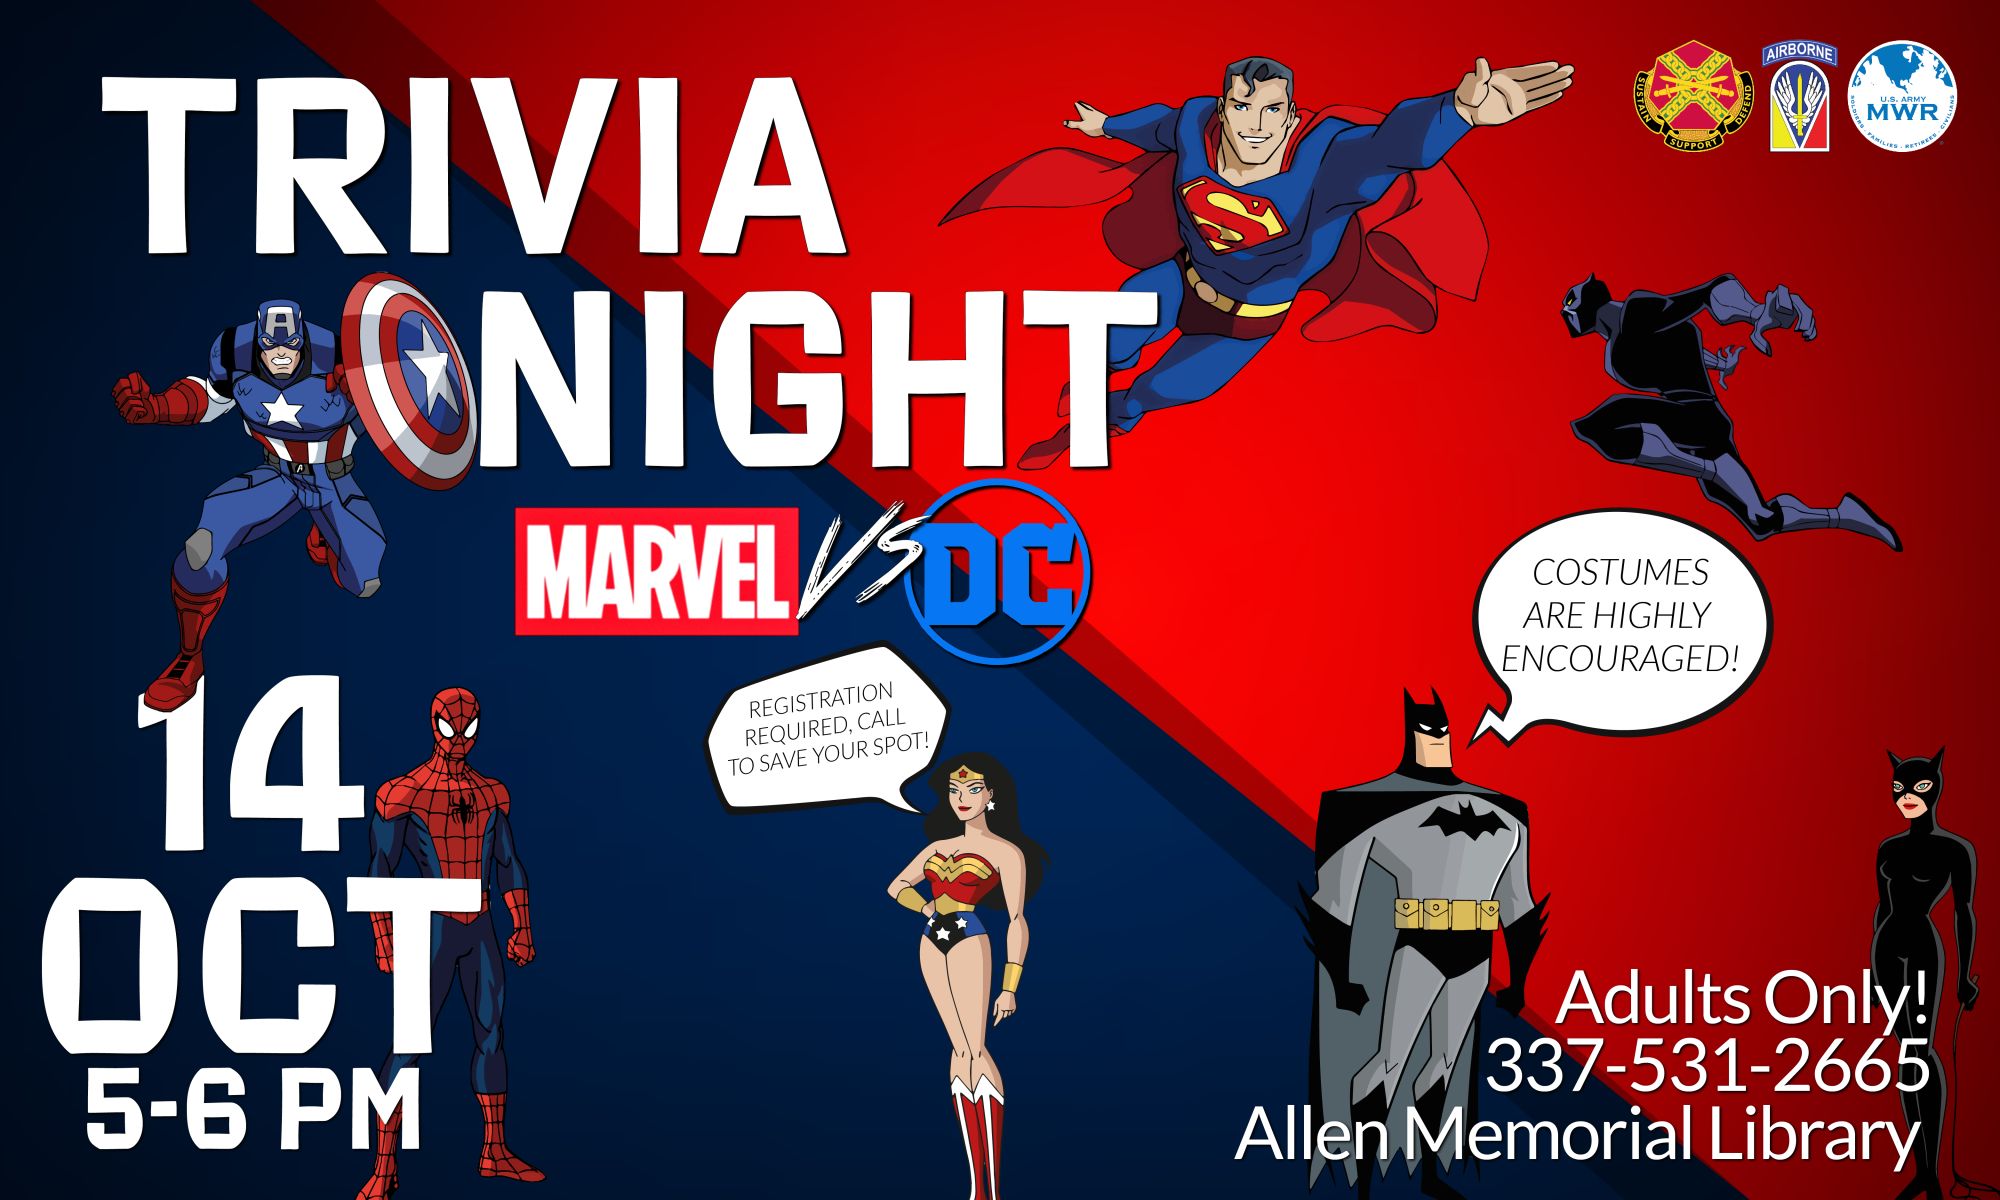 View Event :: Marvel vs. DC Trivia at the Library :: Ft. Polk :: US Army MWR